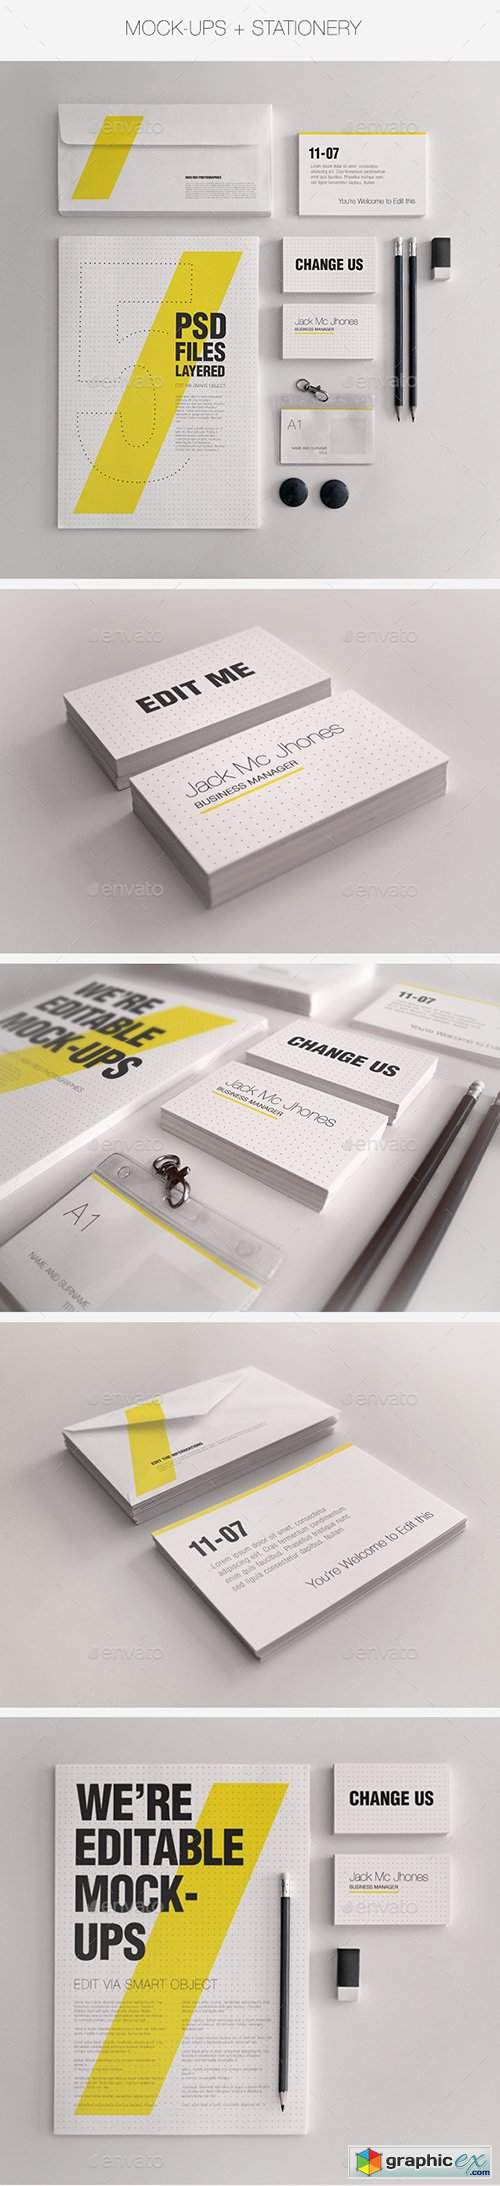 Realistic Stationery Mock-Up Set 1 - Corporate ID